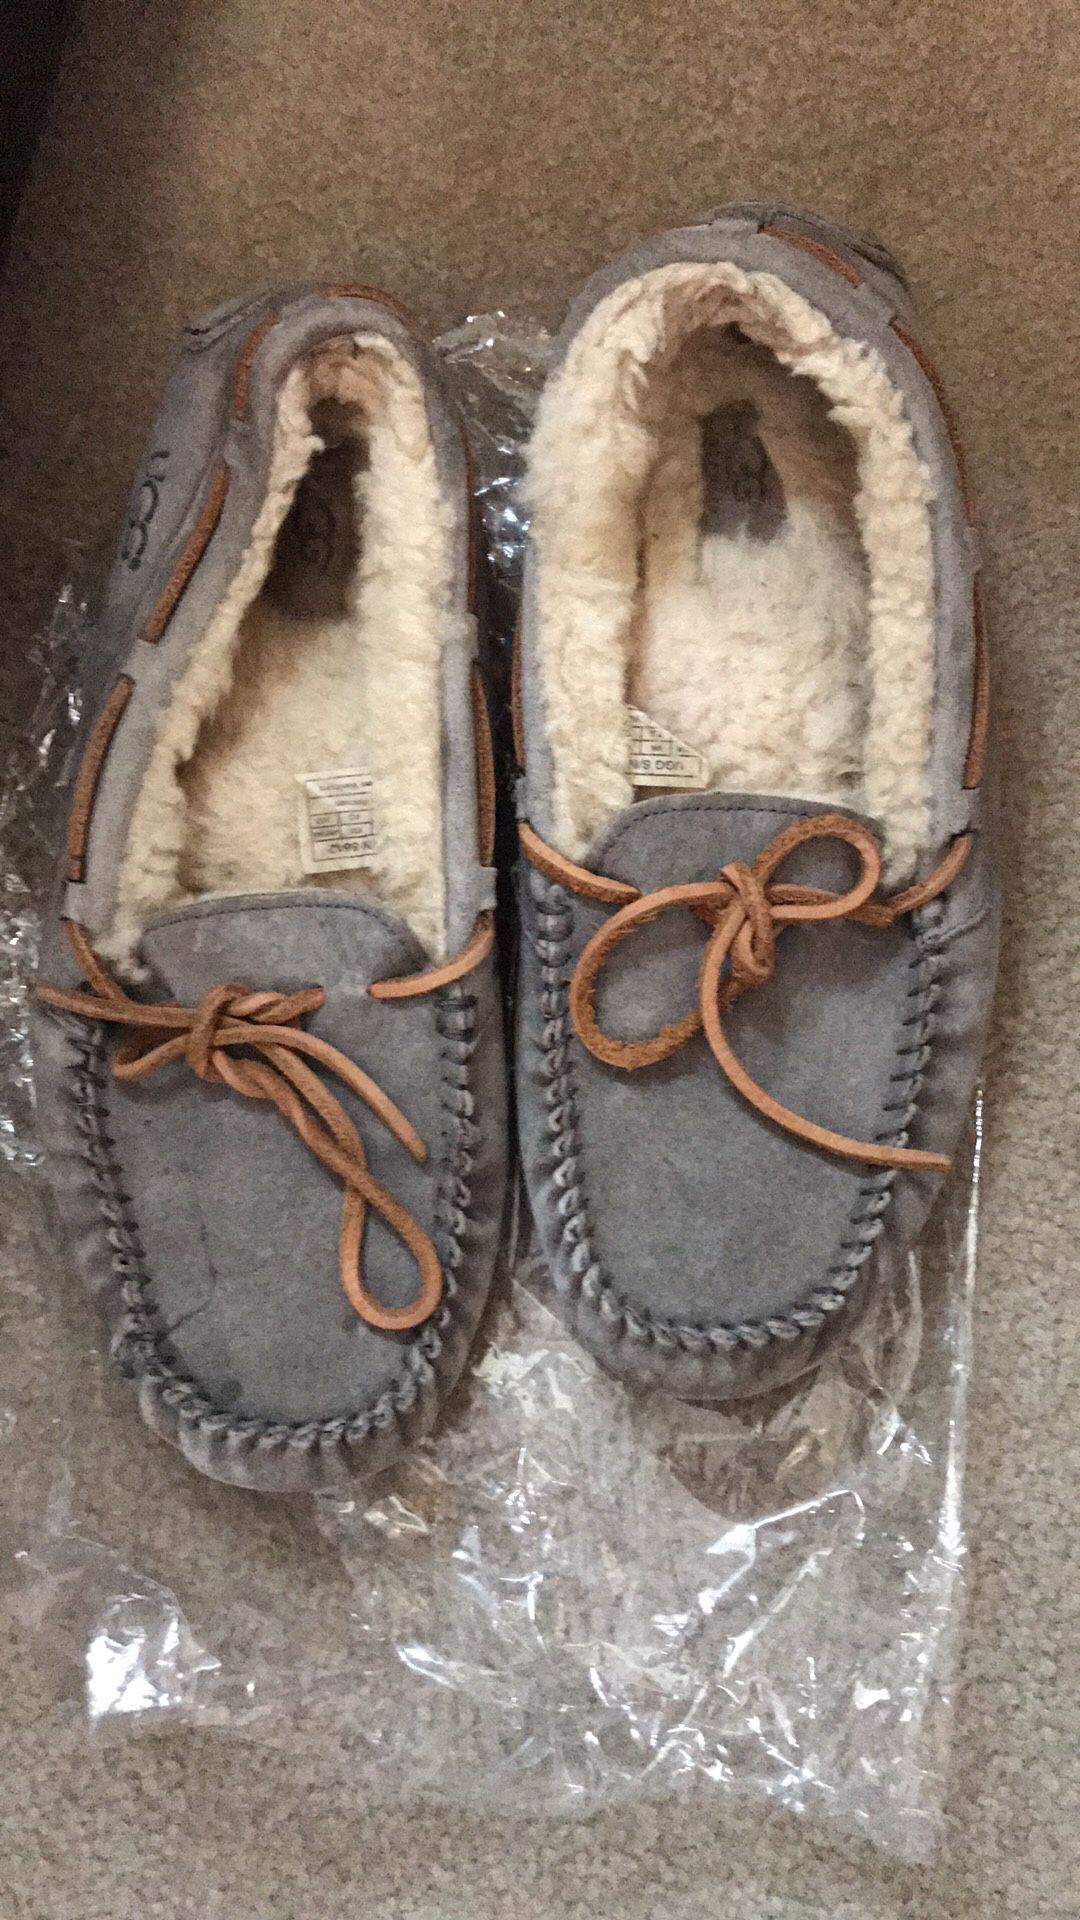 Uggs shoes size 9